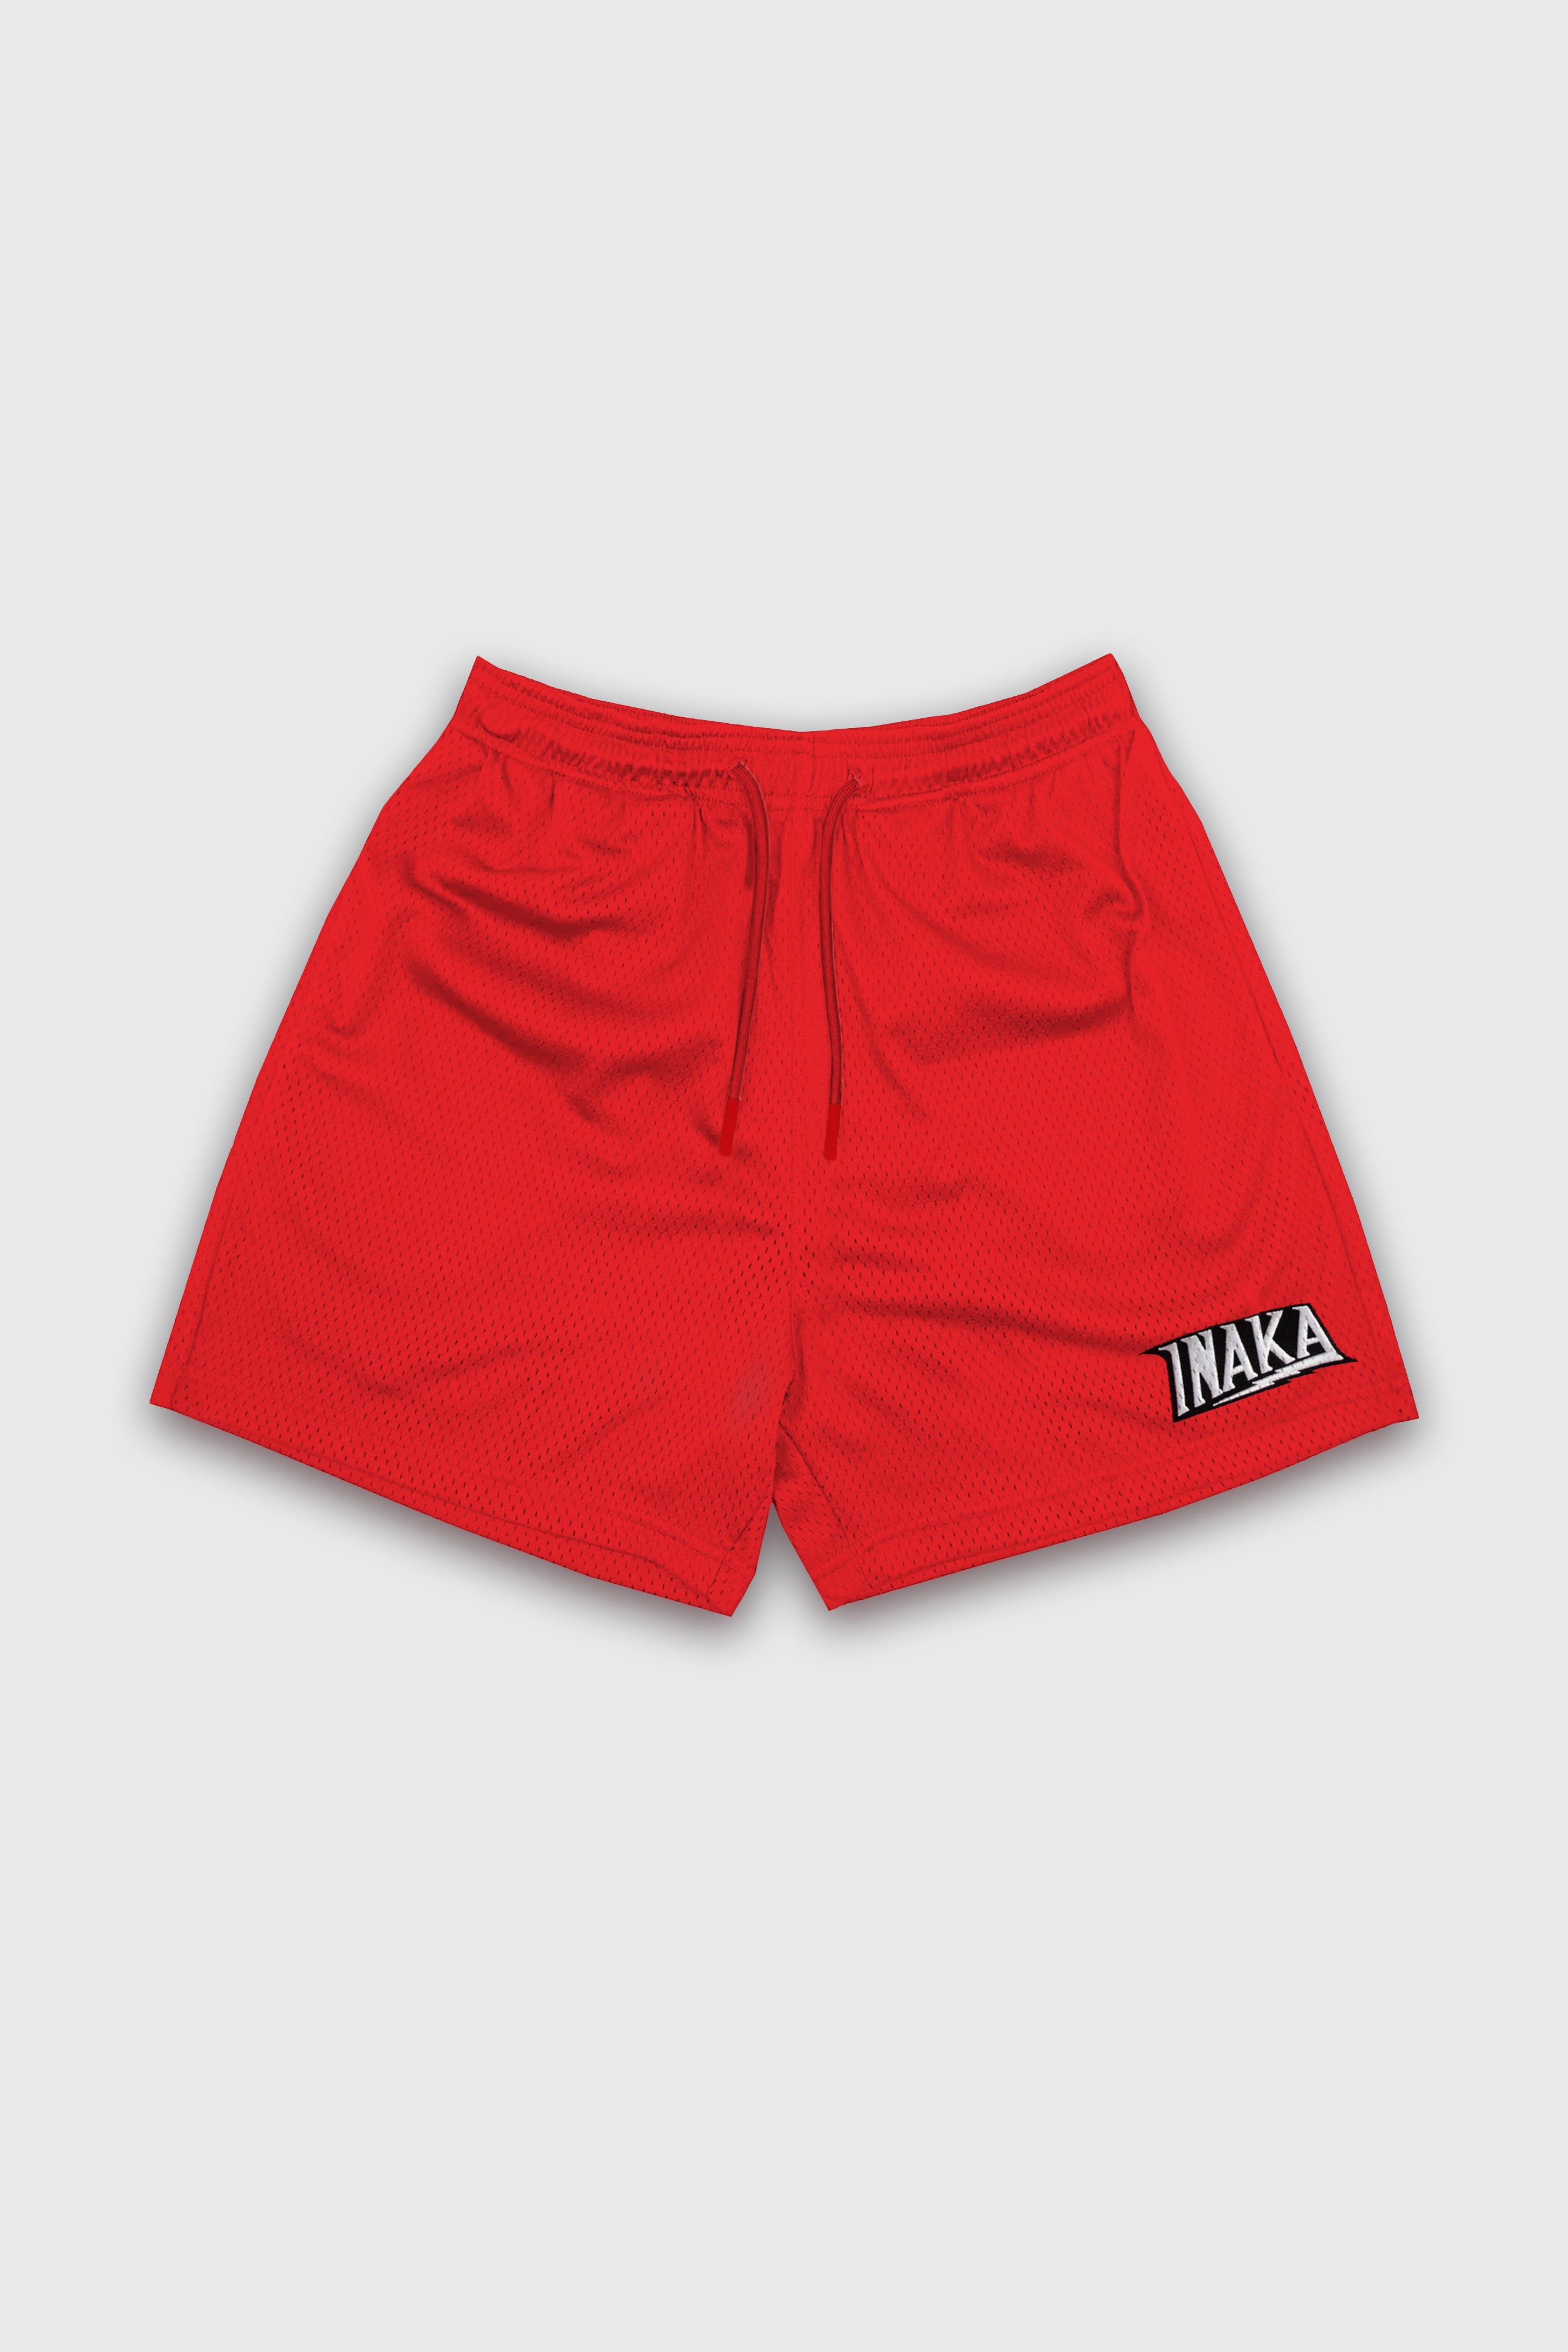 Men's Graphic Mesh Shorts - Classic Bolt Red